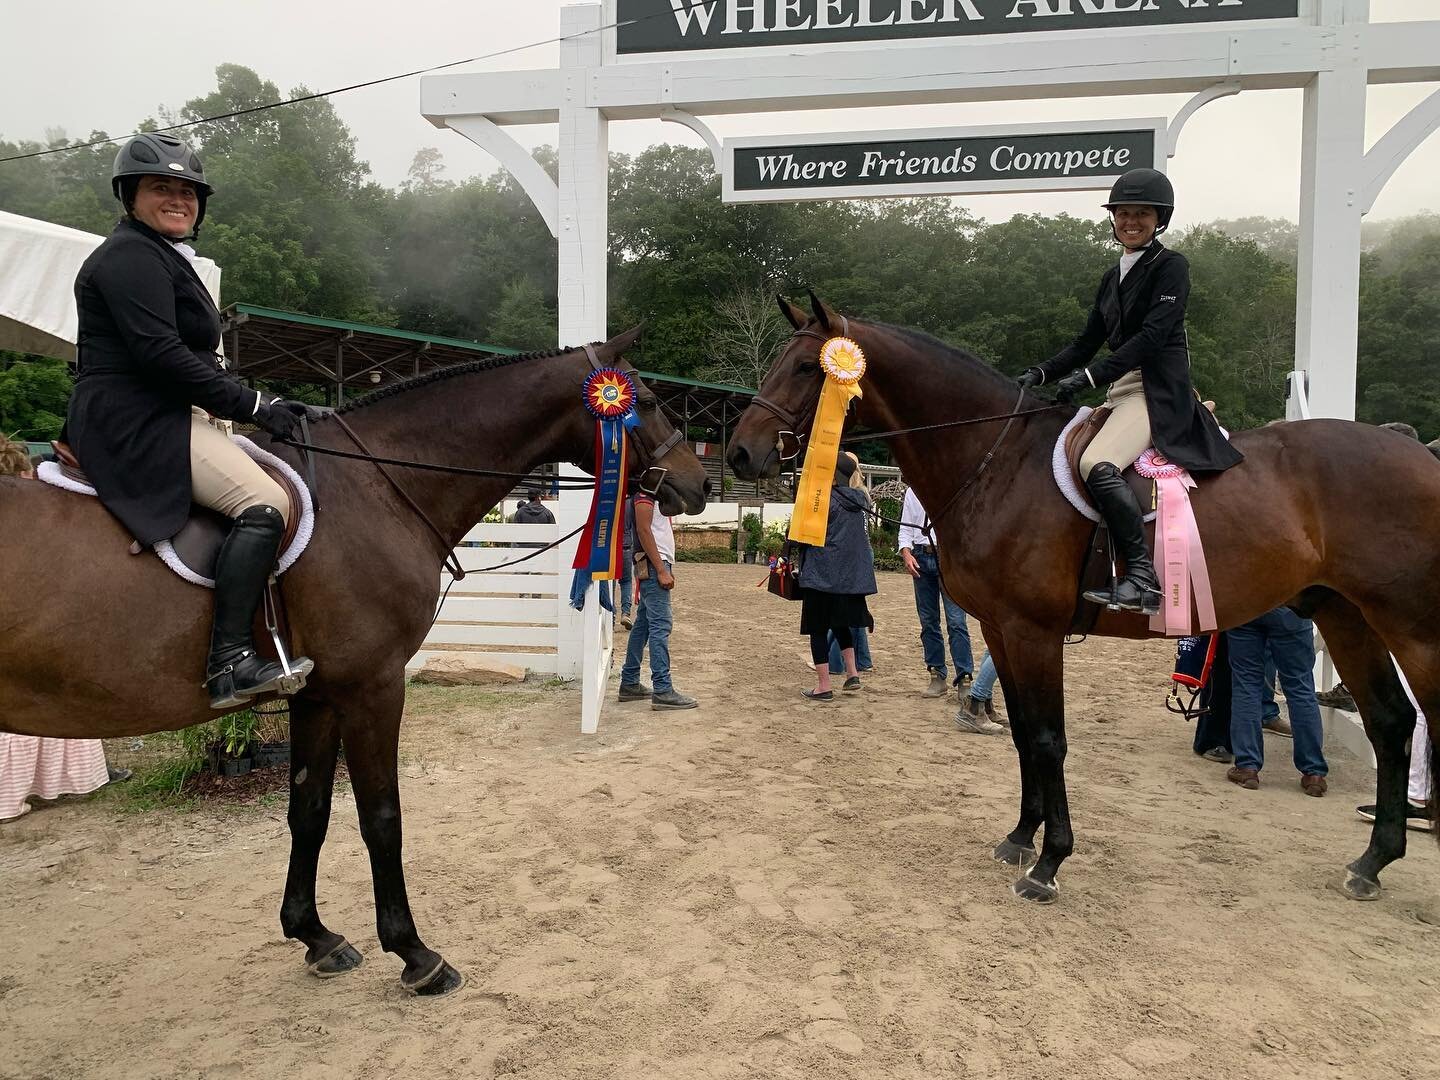 What a night! Bryan Baldwin&rsquo;s El Primero and Tori Colvin win, Liza and Mary Jane King&rsquo;s Drumroll 3rd, Liza and Rebekah Warren&rsquo;s MTM Hand Him Over 5th, and Rebekah Warren on her own Cassico 11th in the $15,000 International Hunter De